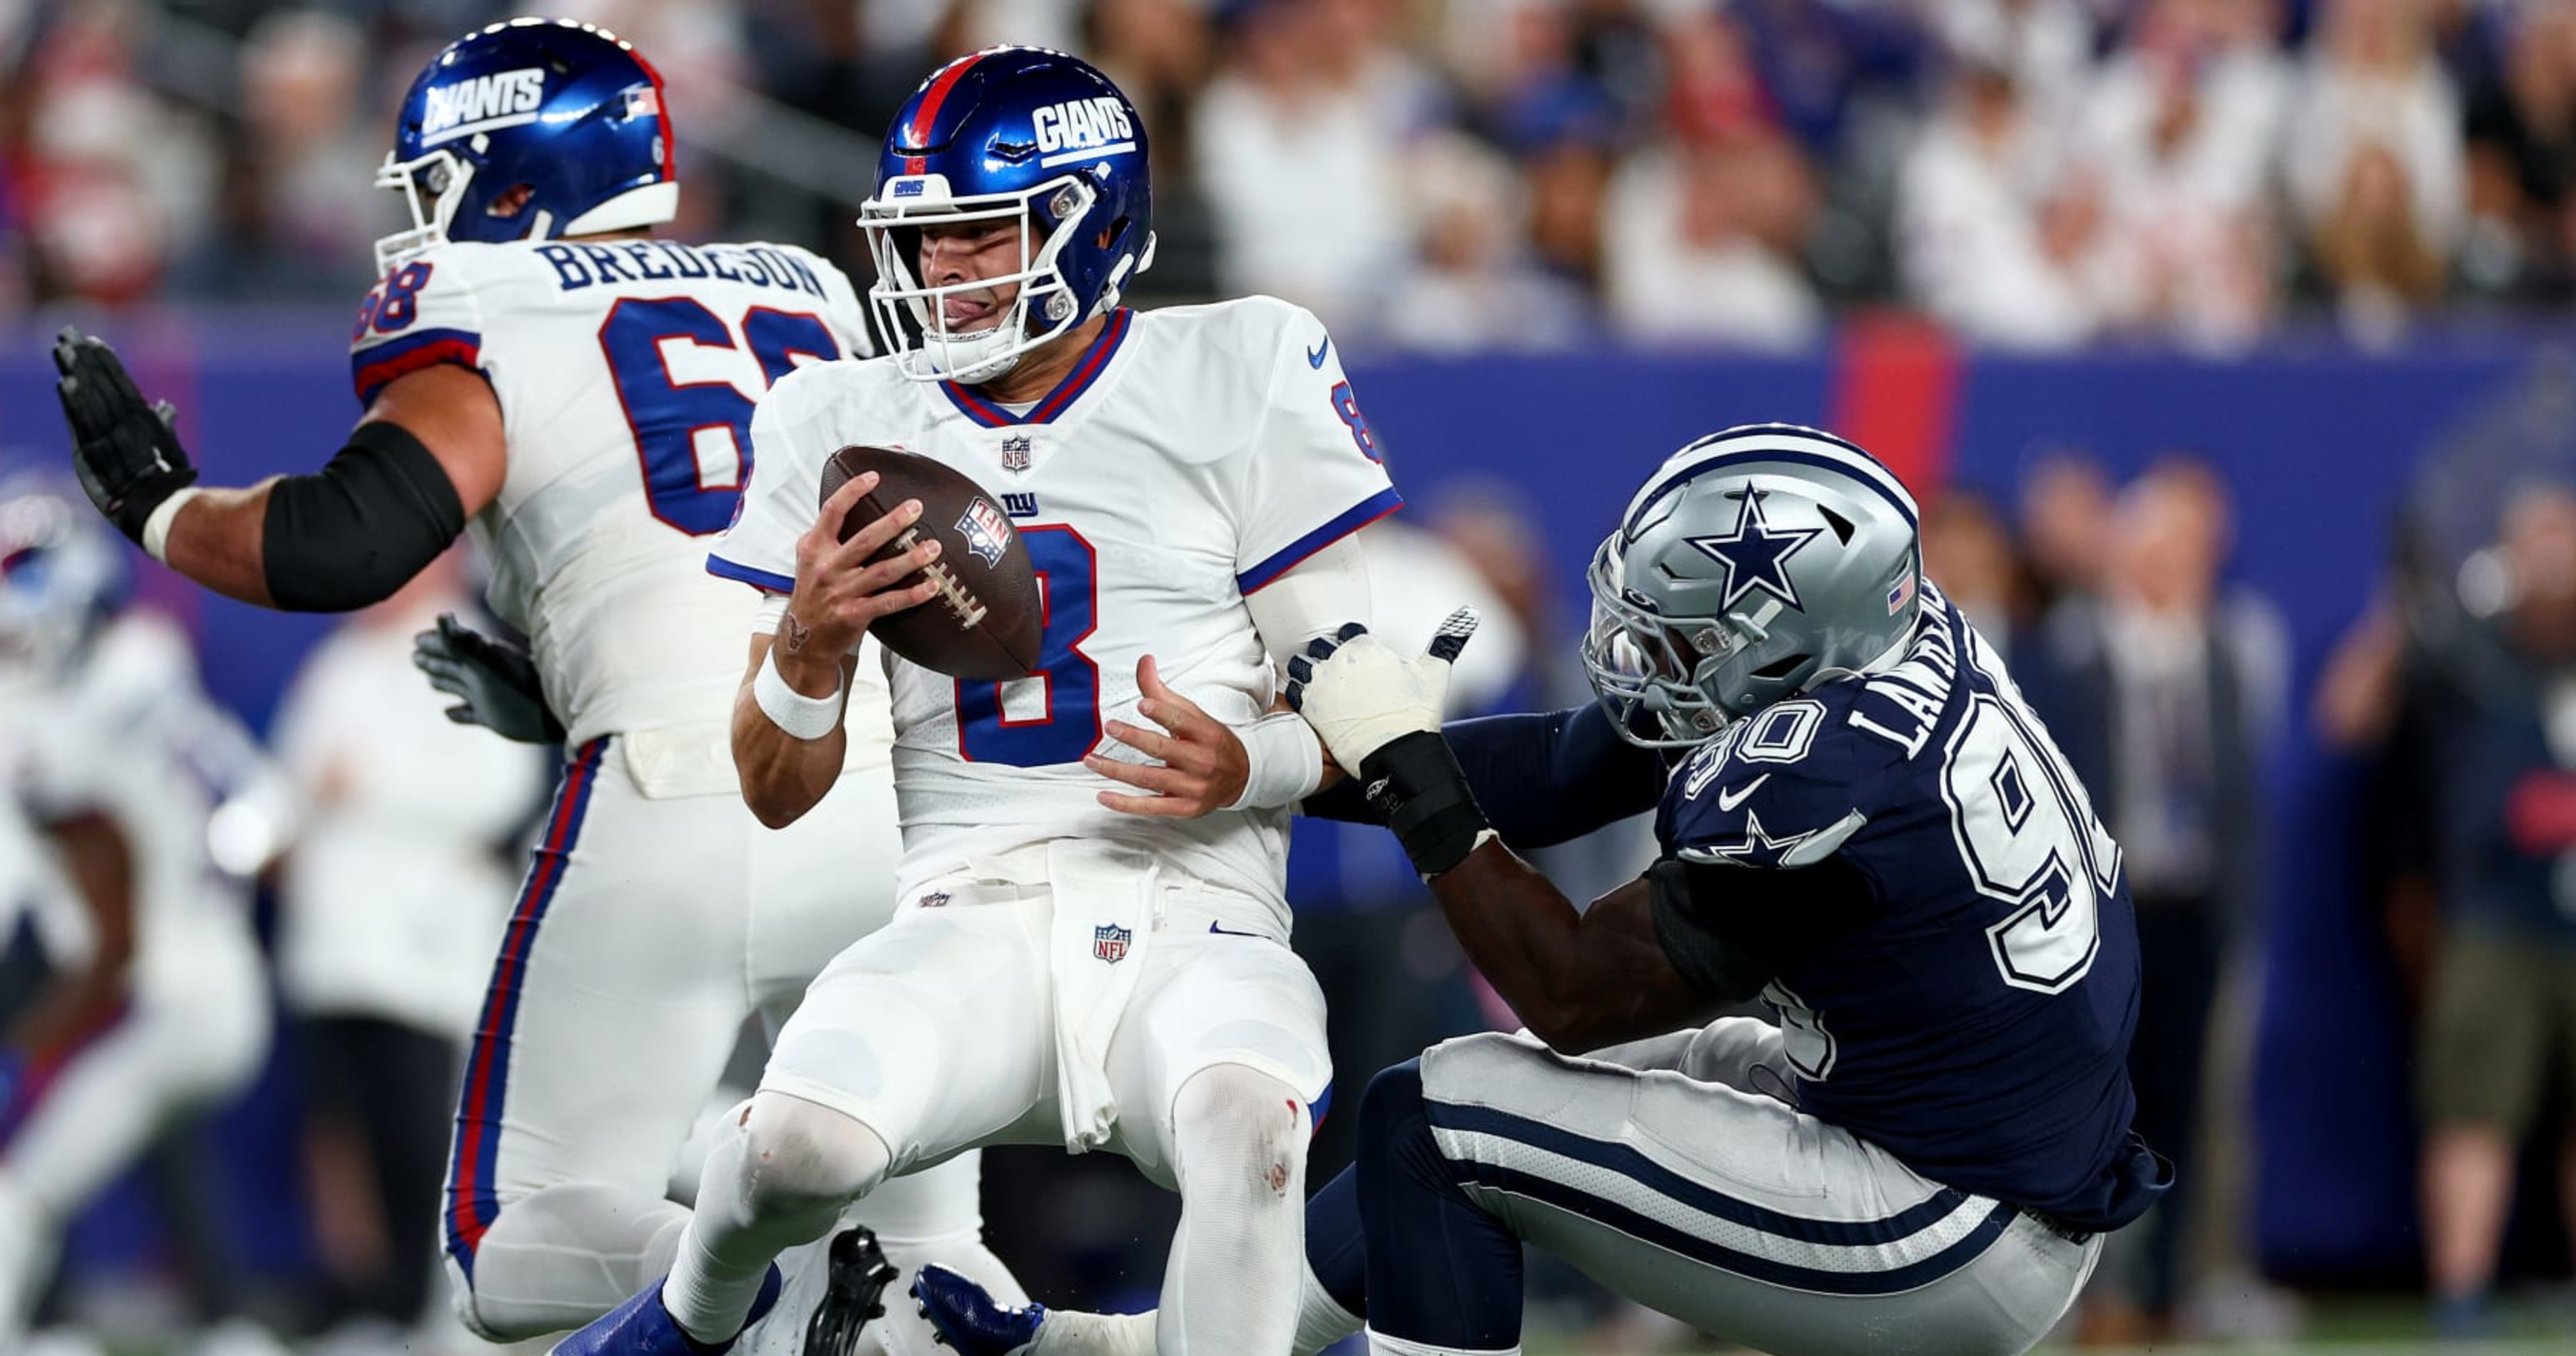 Giants Offensive Line Ripped as Daniel Jones Sacked 5 Times in Loss to